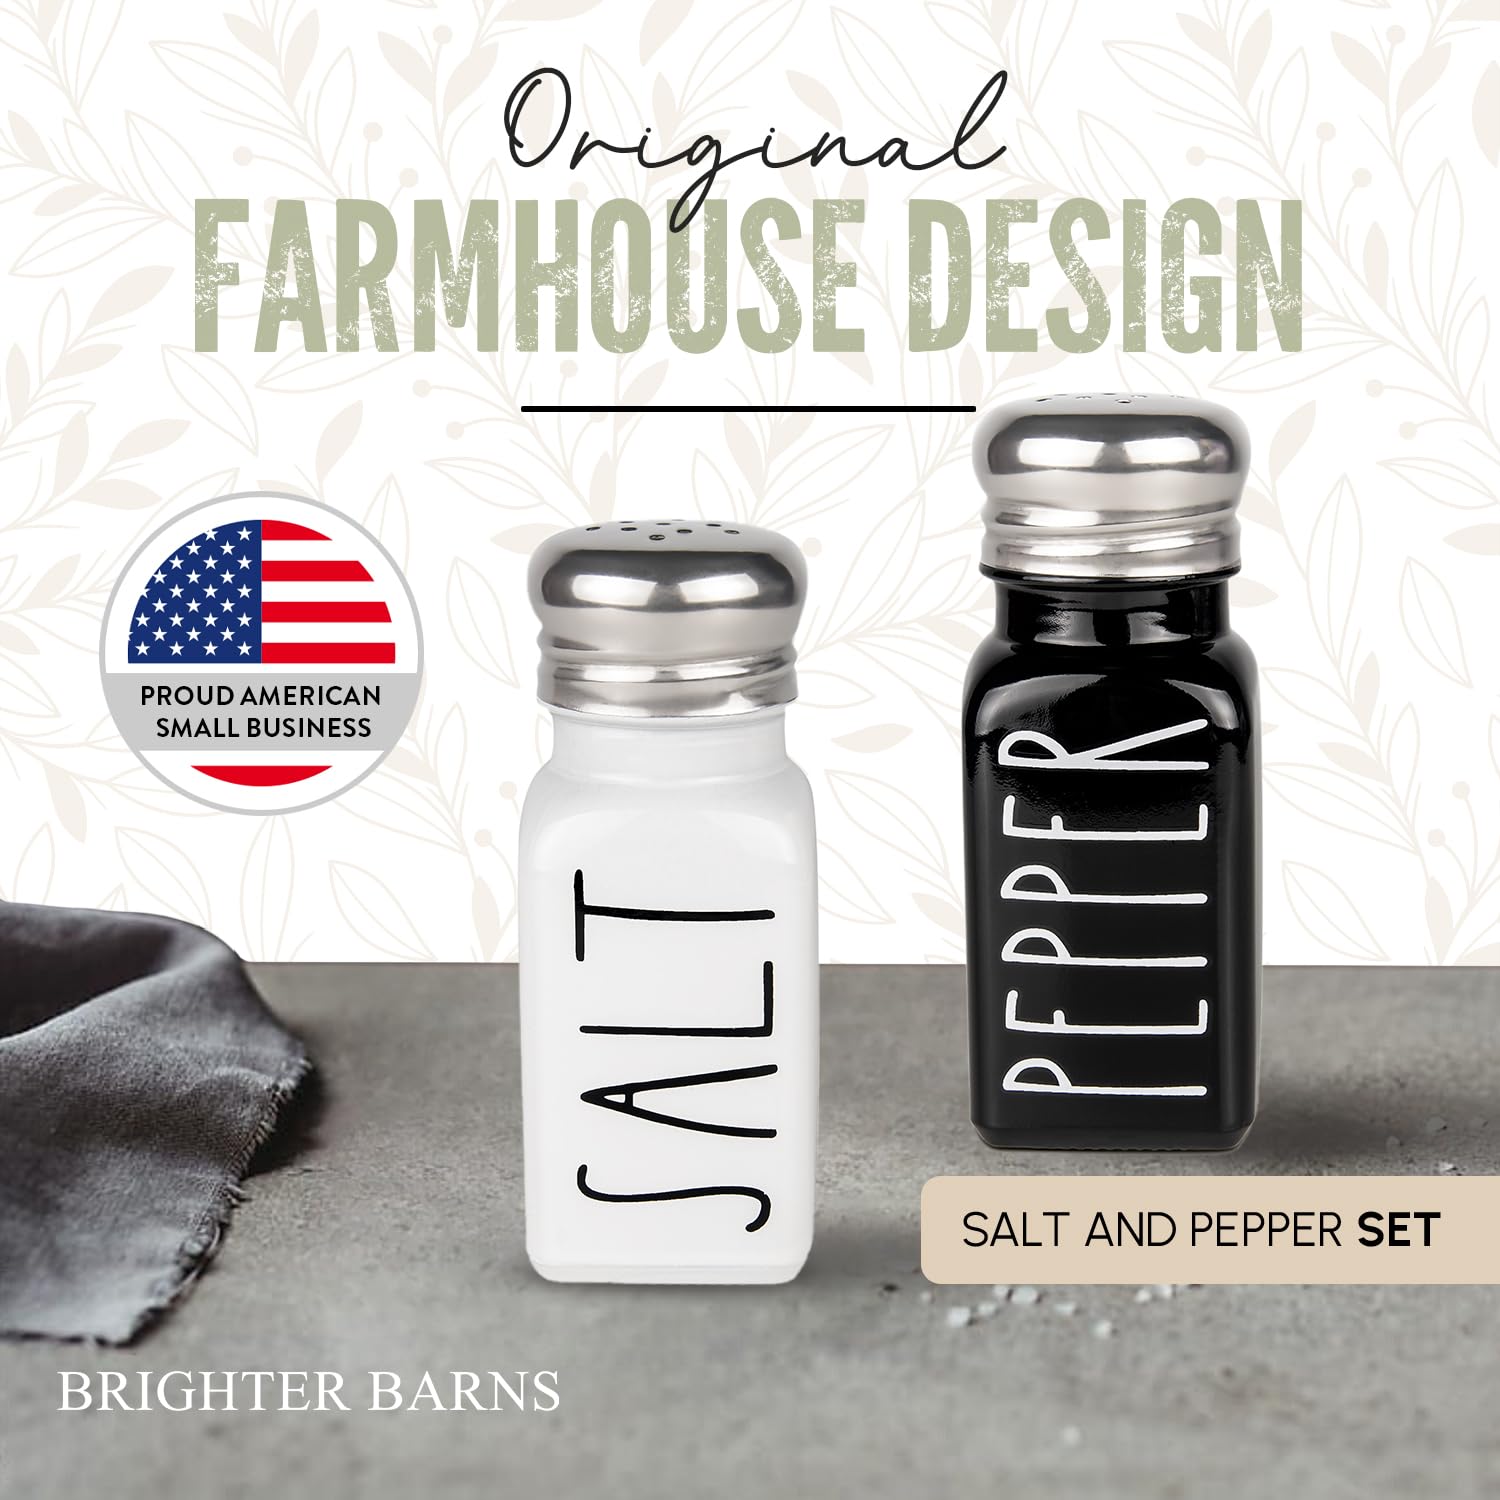 Salt and Pepper Shakers Set by Brighter Barns - Cute Modern Farmhouse Kitchen Decor for Home Restaurants Wedding - Gorgeous Vintage Glass Black White Shaker Sets with Stainless Steel Lids